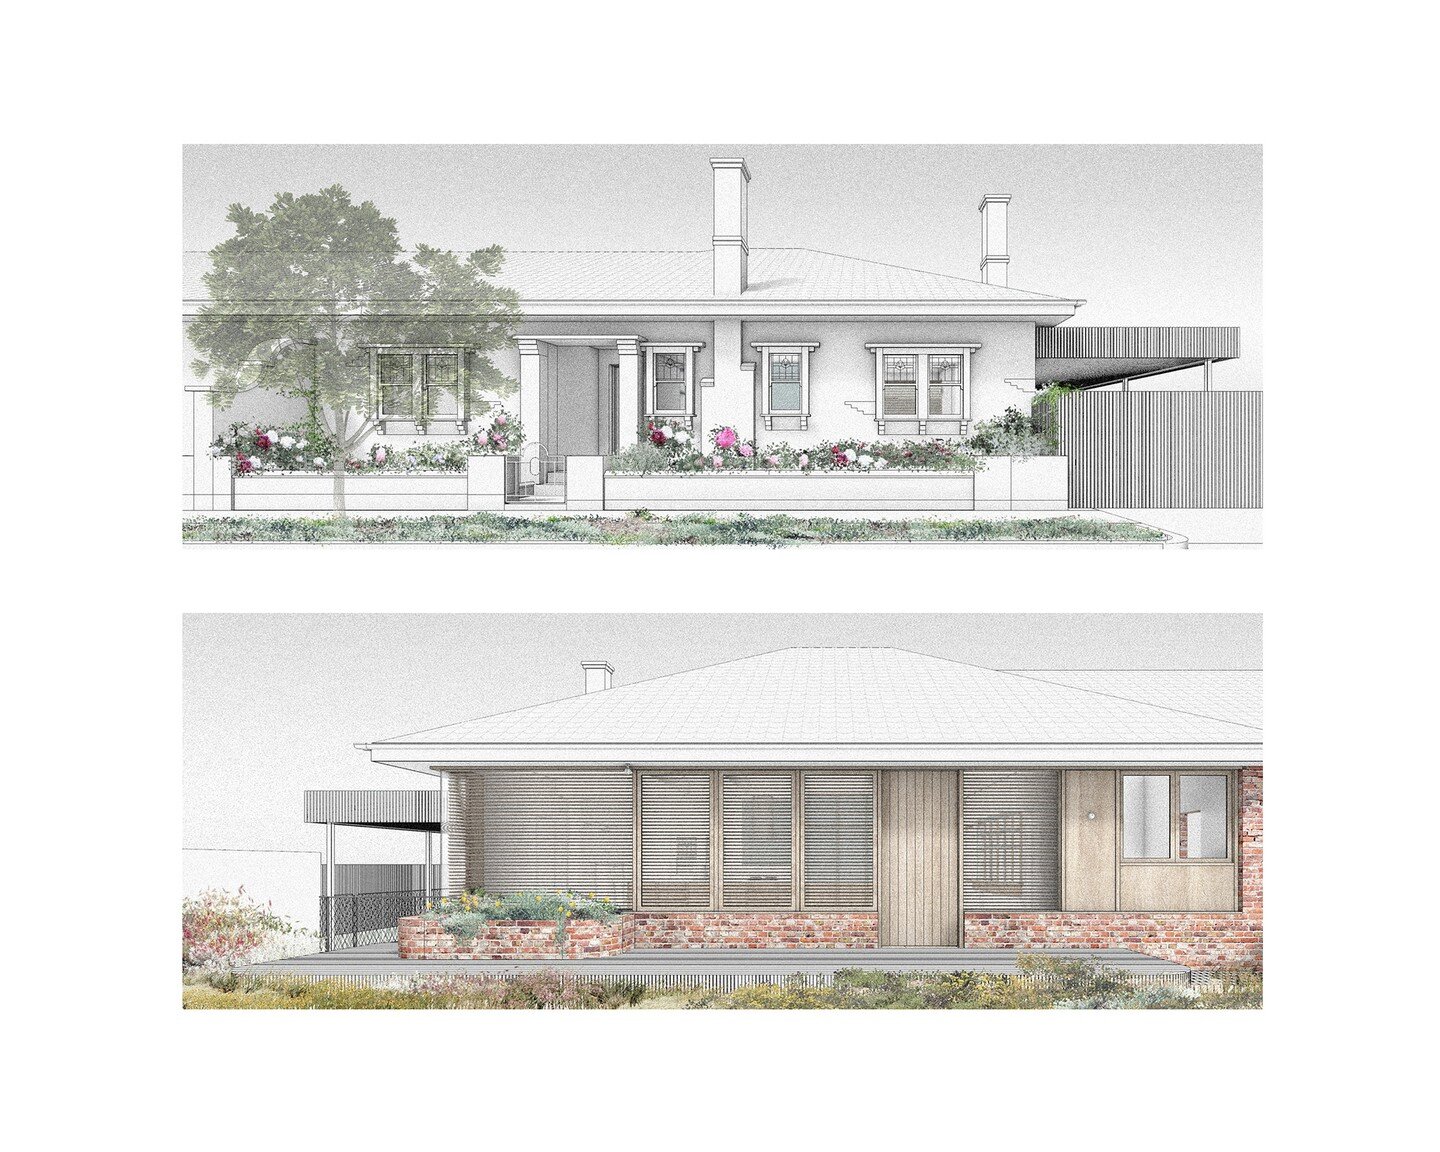 Gardenvale_concept study. Period detailing and traditional rose gardens are refurbished &amp; reinstated along the street in this semi-detached home. In the backyard, the eastern elevation is rebuilt to deliver an immediate, yet filtered relationship